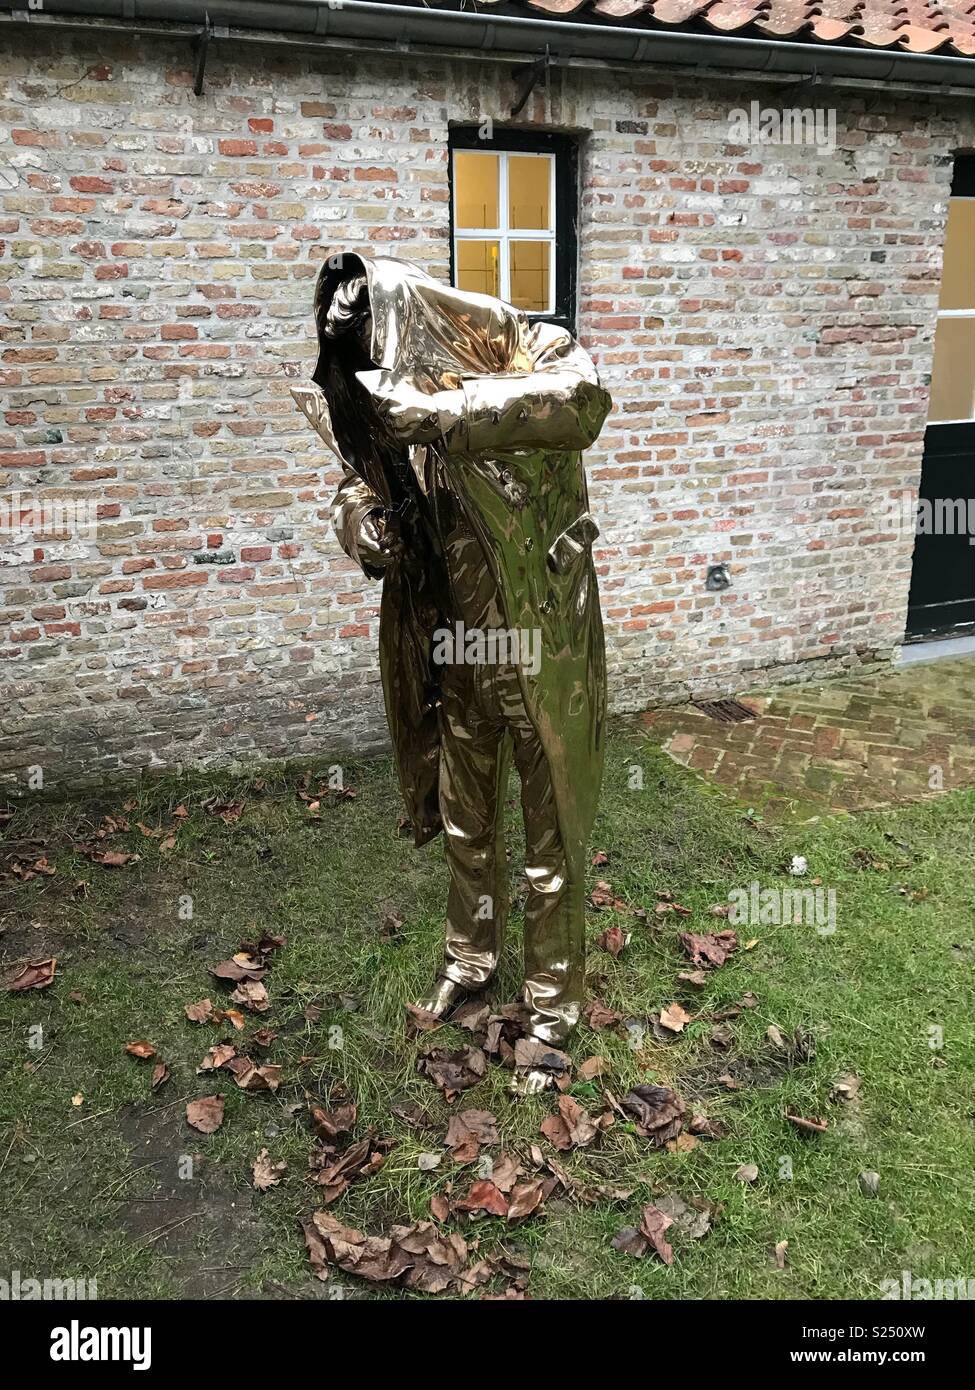 Gold statue of man holding his coat over his head and not wearing any shoes. Bruges, Belgium. Stock Photo